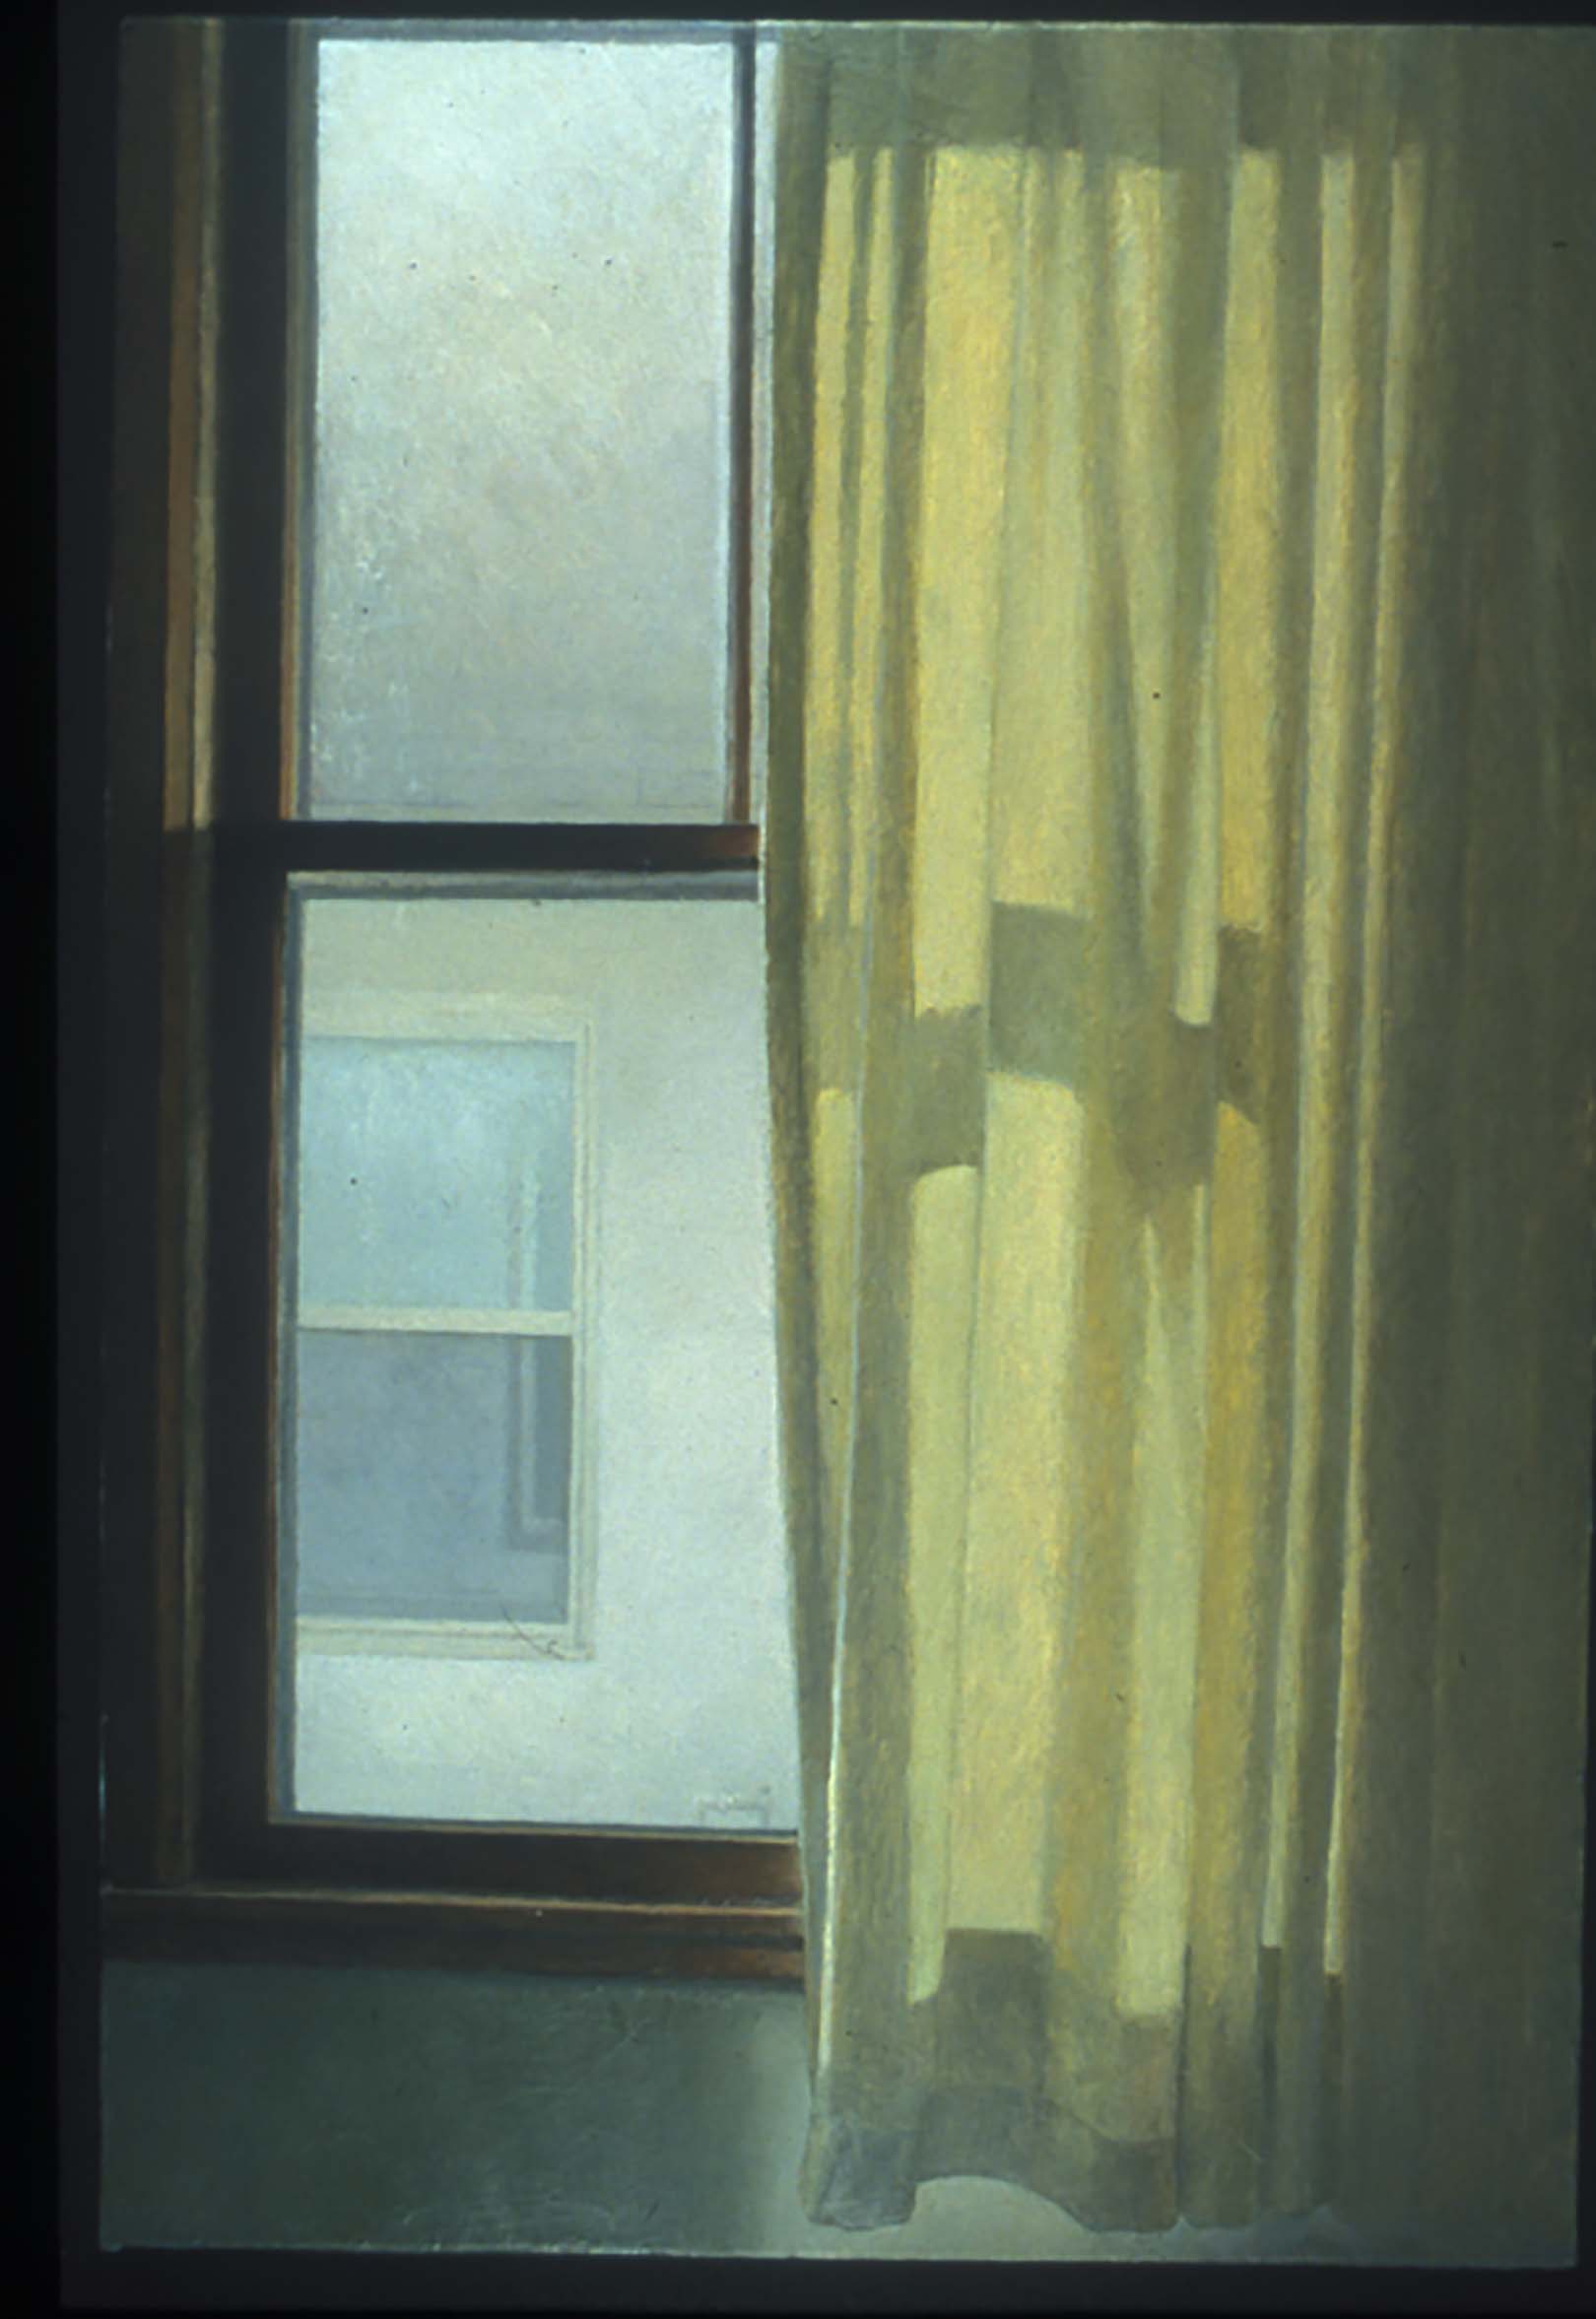 Curtain / oil on panel / 15 &half" x 23 ½" / Private Collection